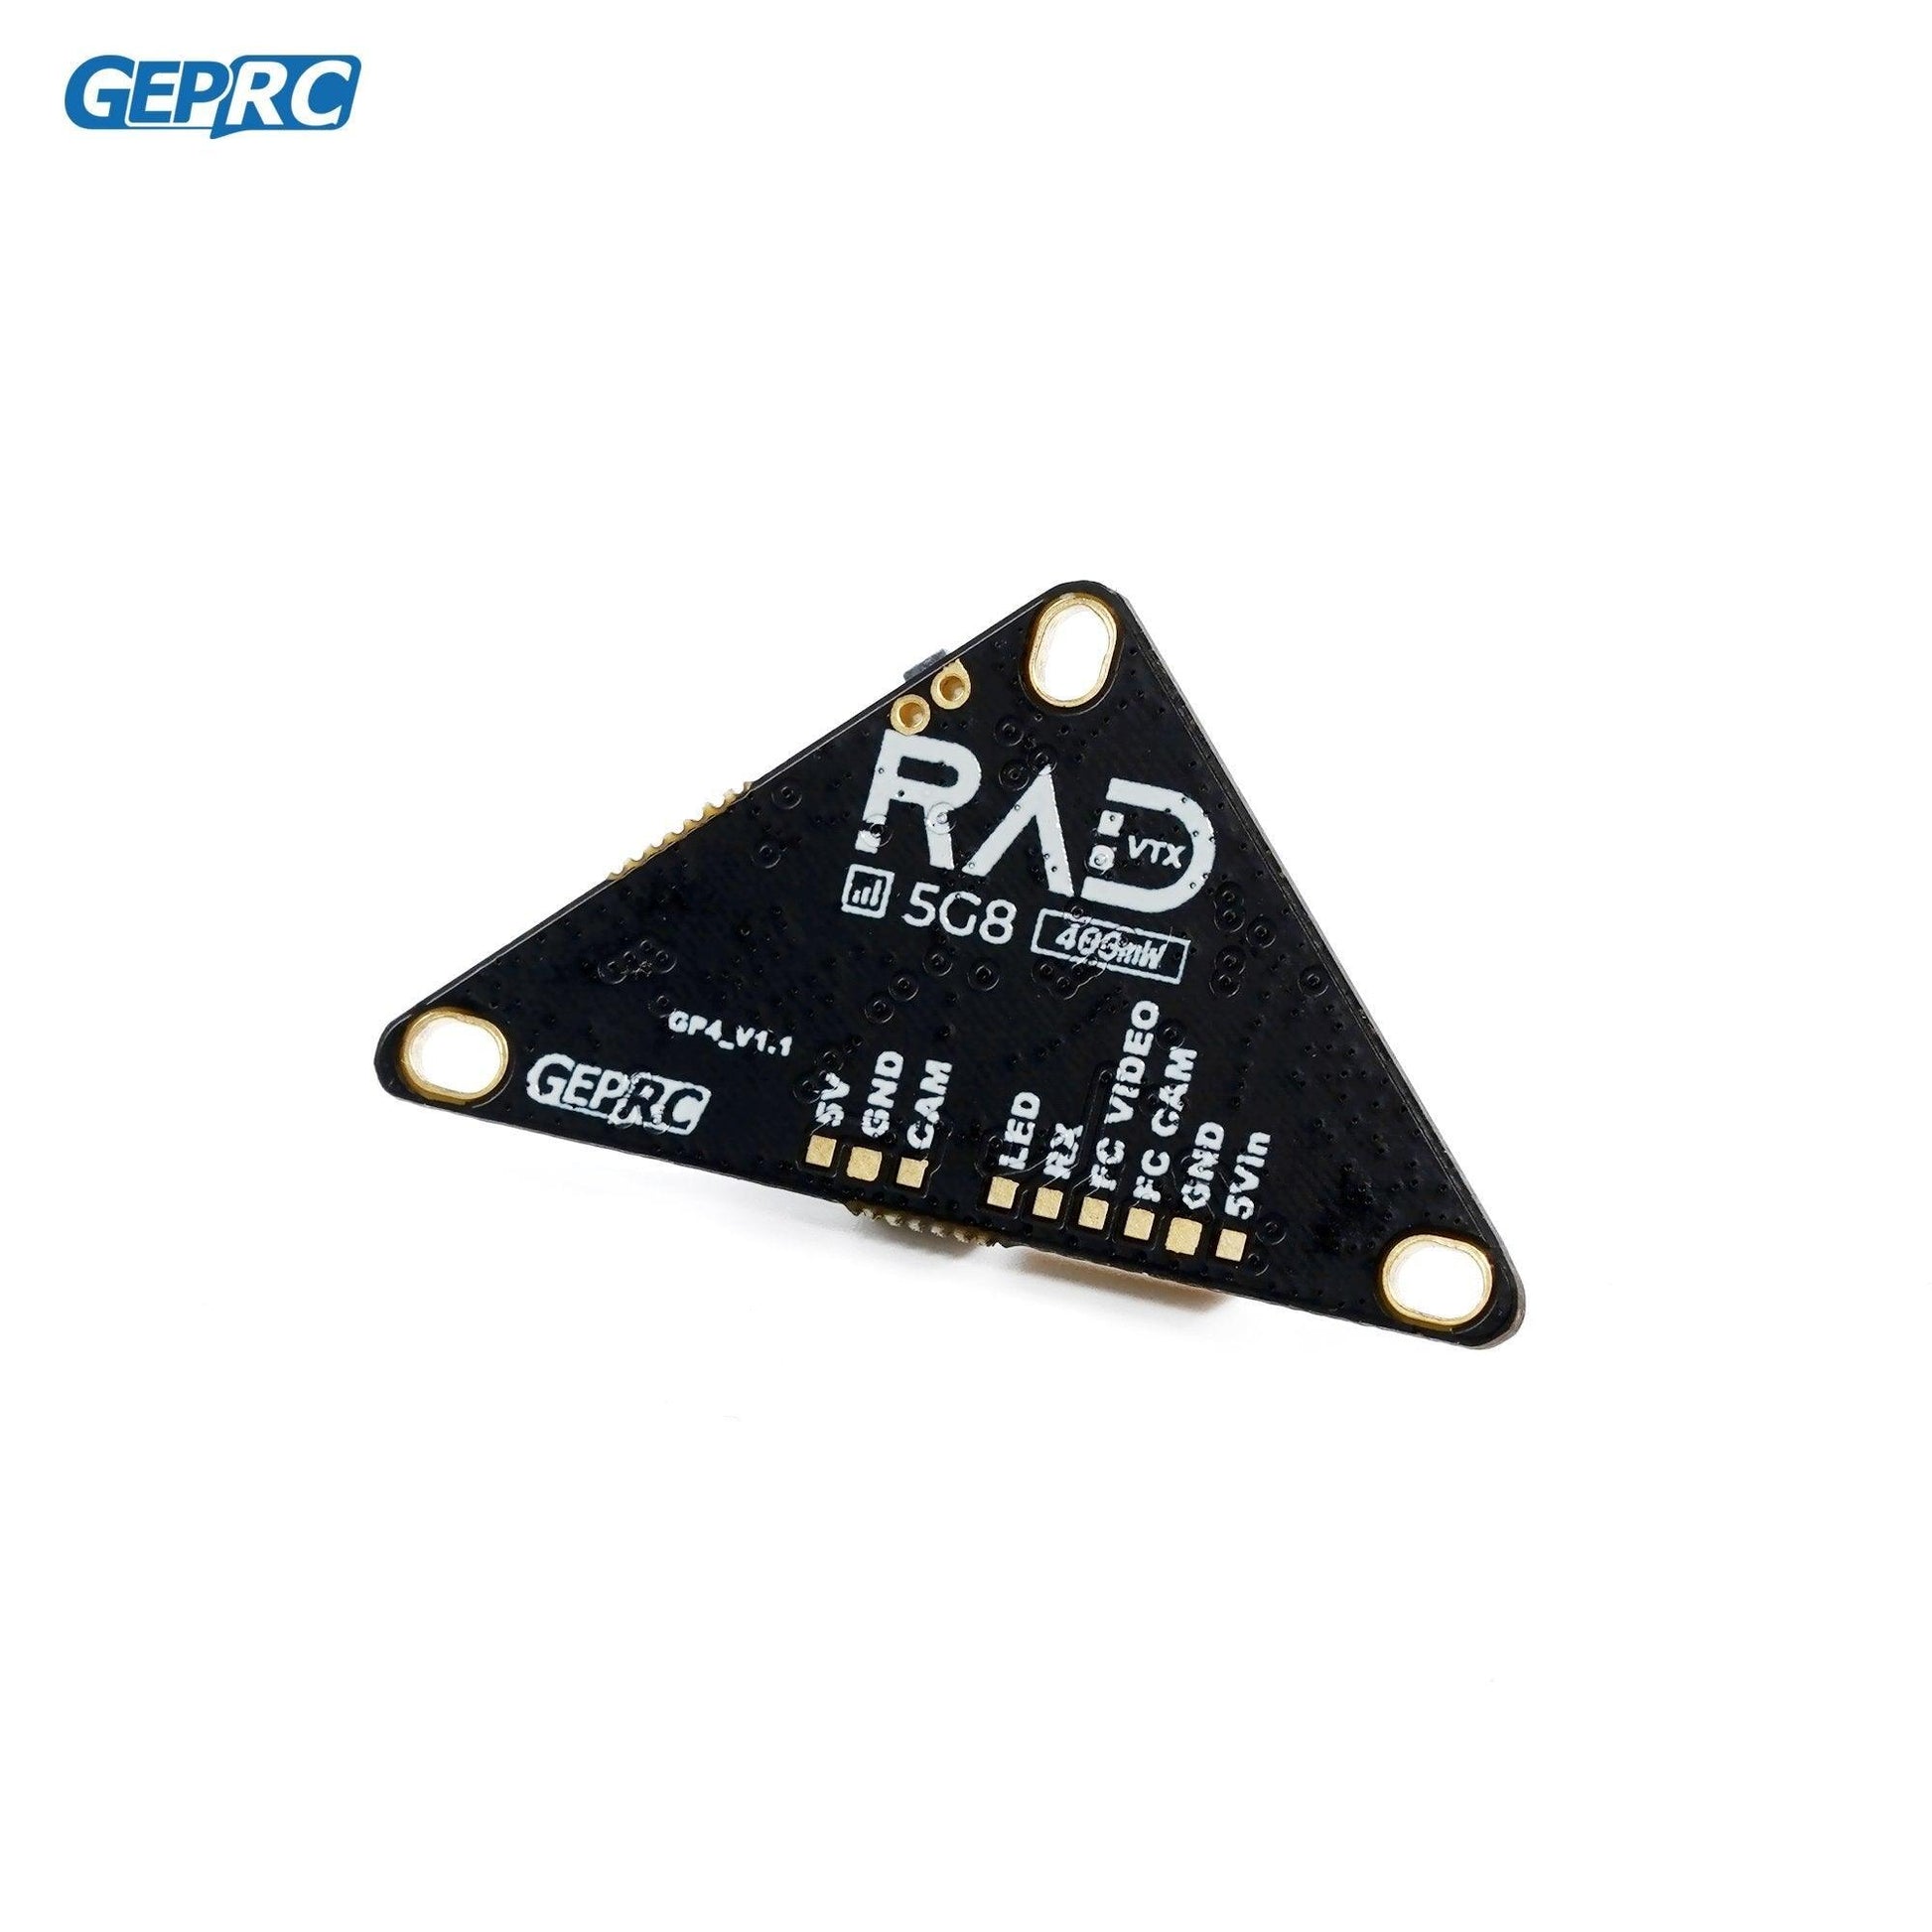 GEPRC RAD Whoop 5.8G VTX - 32CH Video Triangle Image Transmission For DIY RC FPV Quadcopter Drone Replacement Accessories Parts - RCDrone